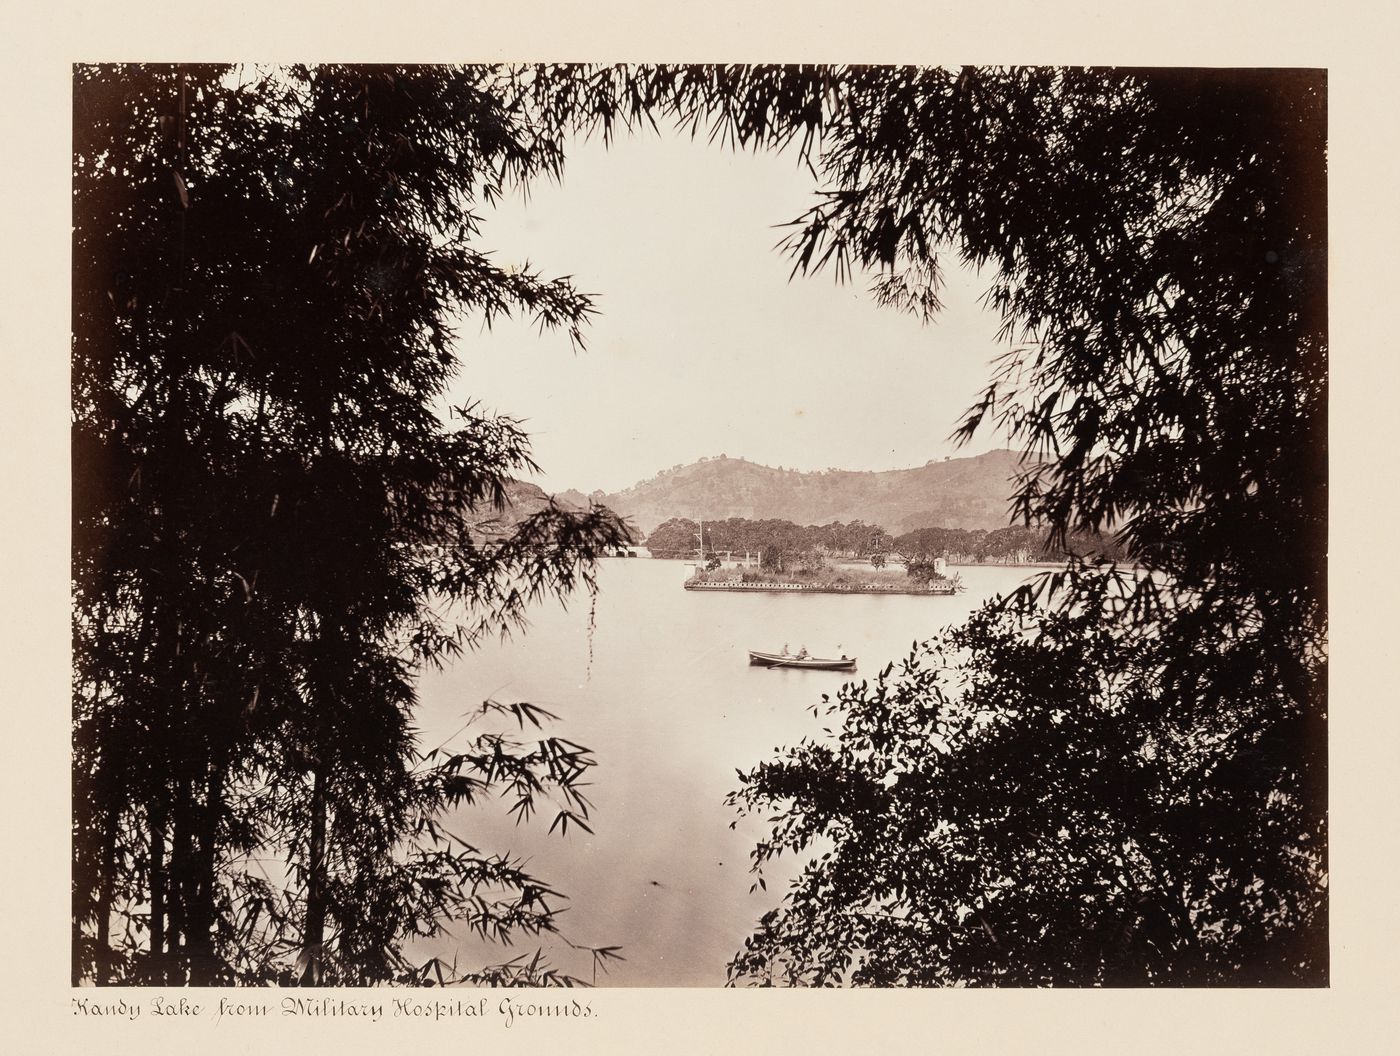 View of Kandy Lake from the ground of the Military Hospital, Kandy, Ceylon (now Sri Lanka)